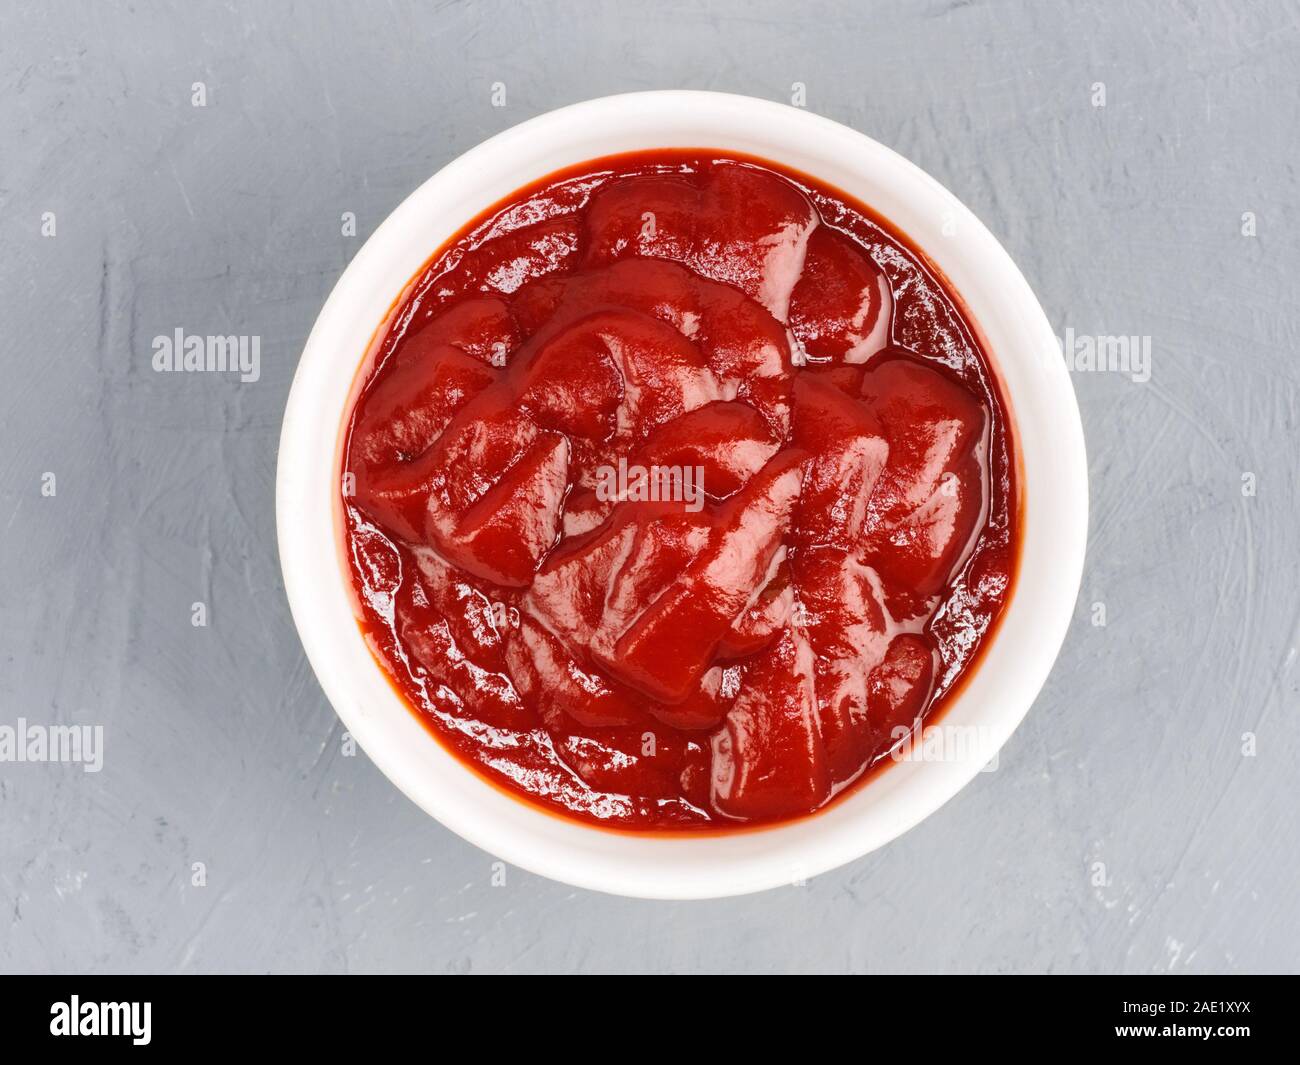 Tomato paste in a white bowl on a gray concrete background. Healthy eating concept Stock Photo